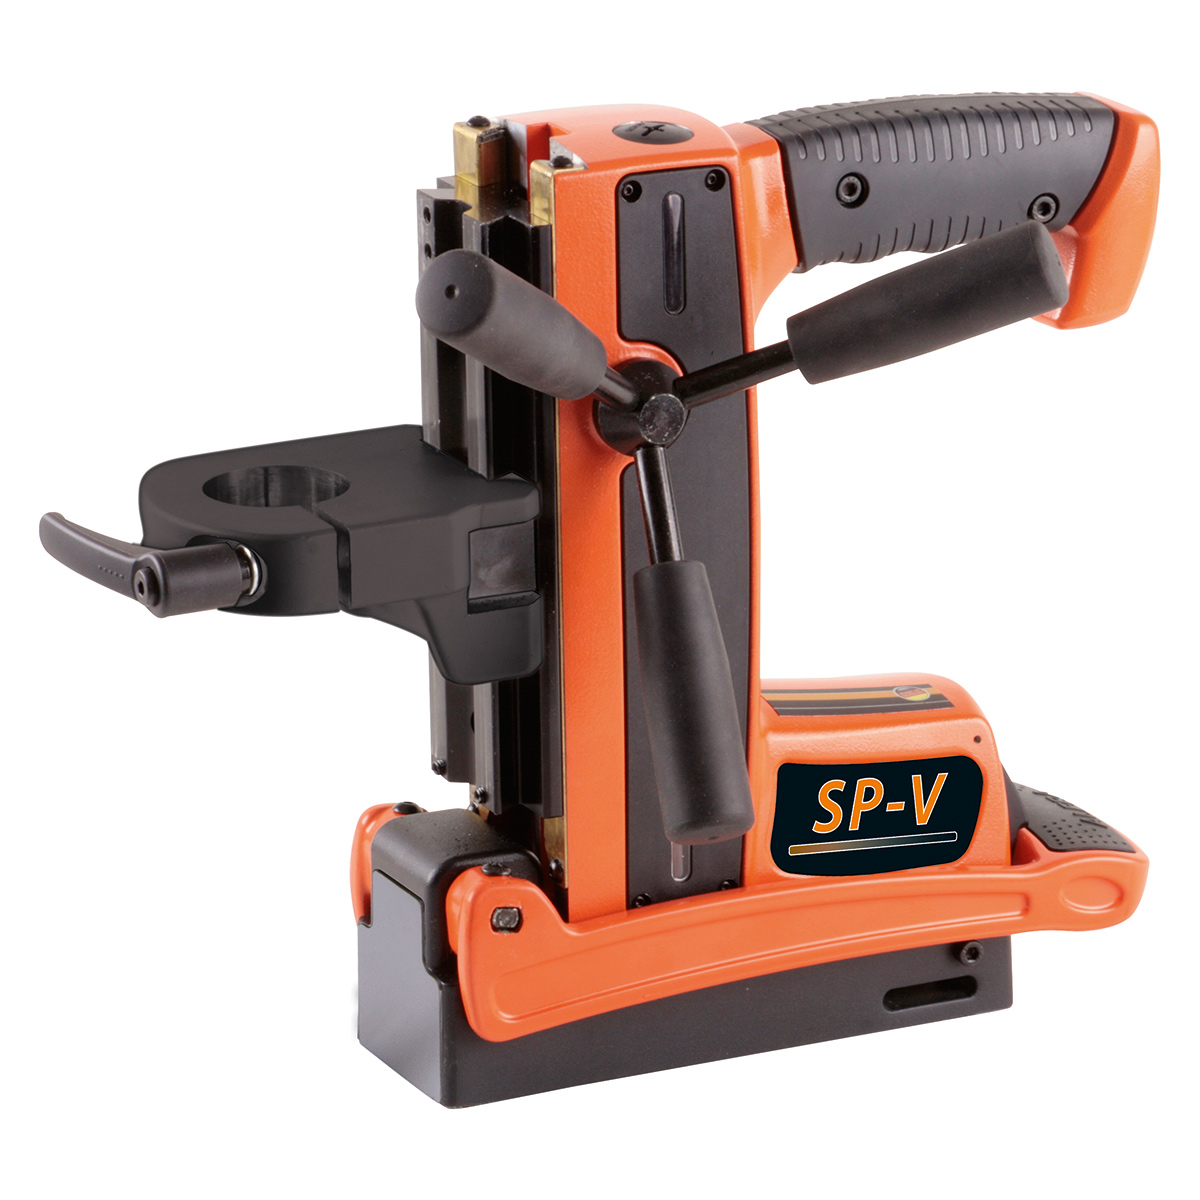 Universal magnetic drill stand type SP-V